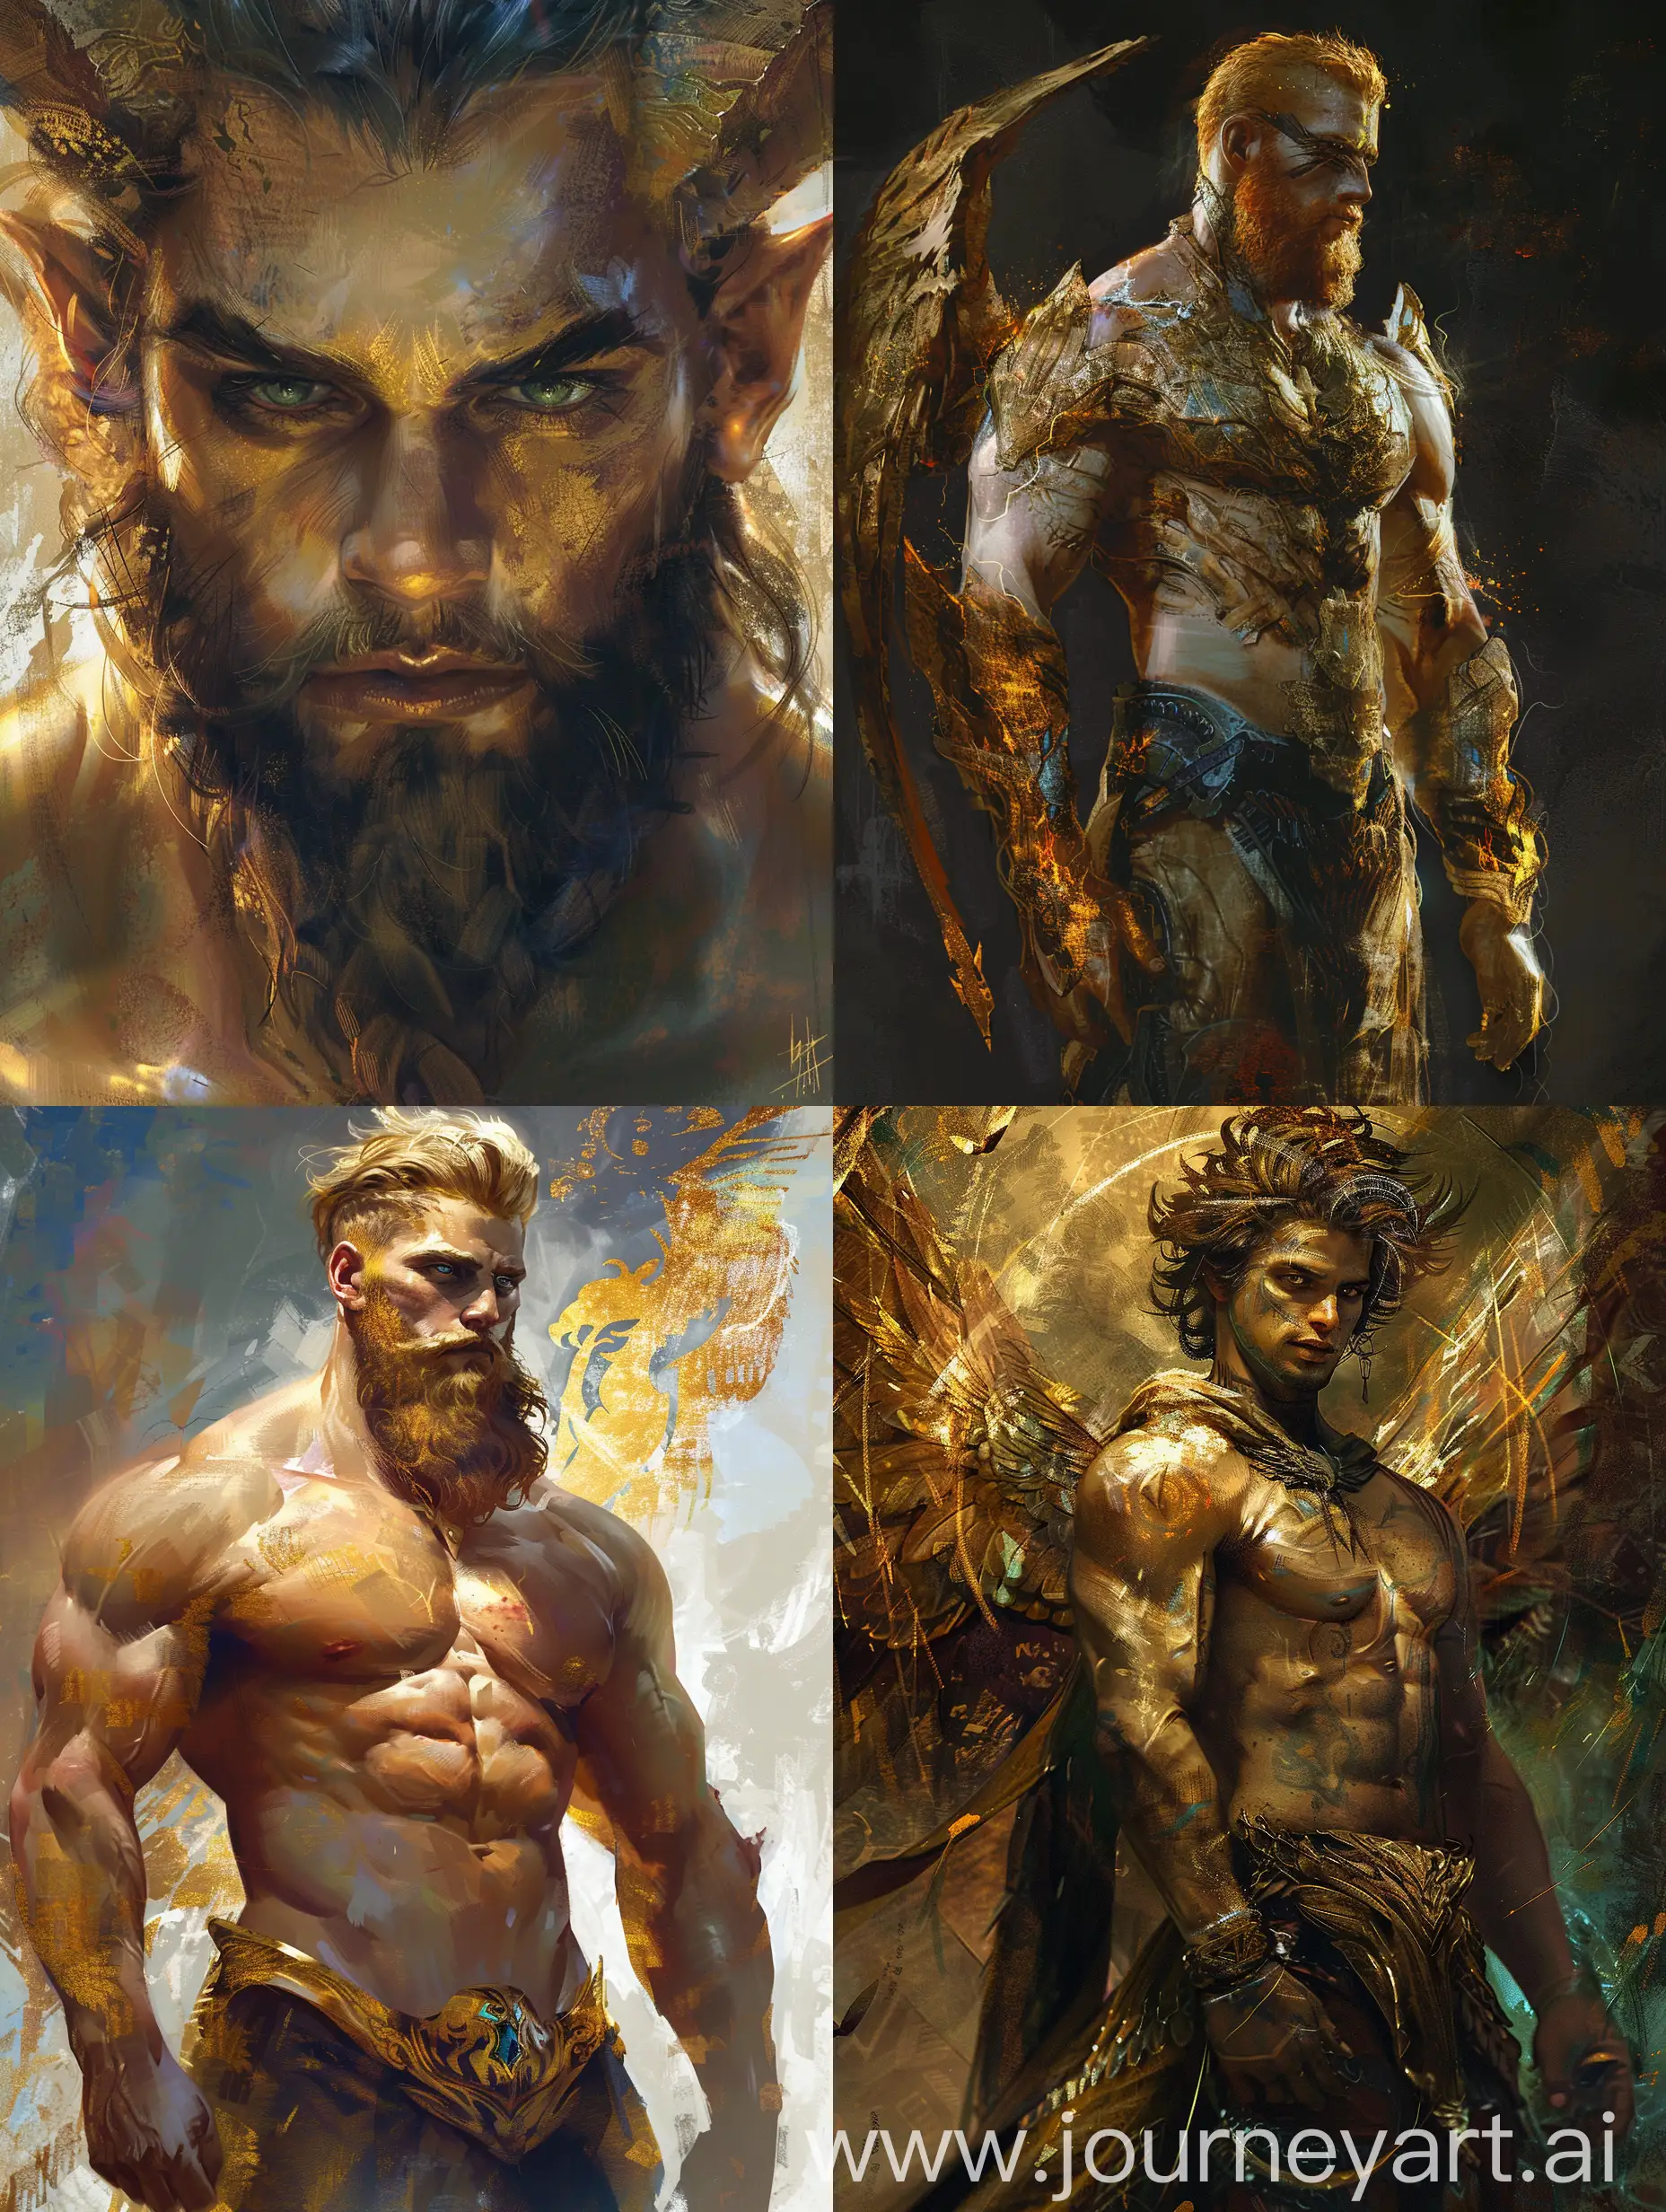 Mythical-Titan-God-with-Bronze-Skin-and-Steel-Grey-Eyes